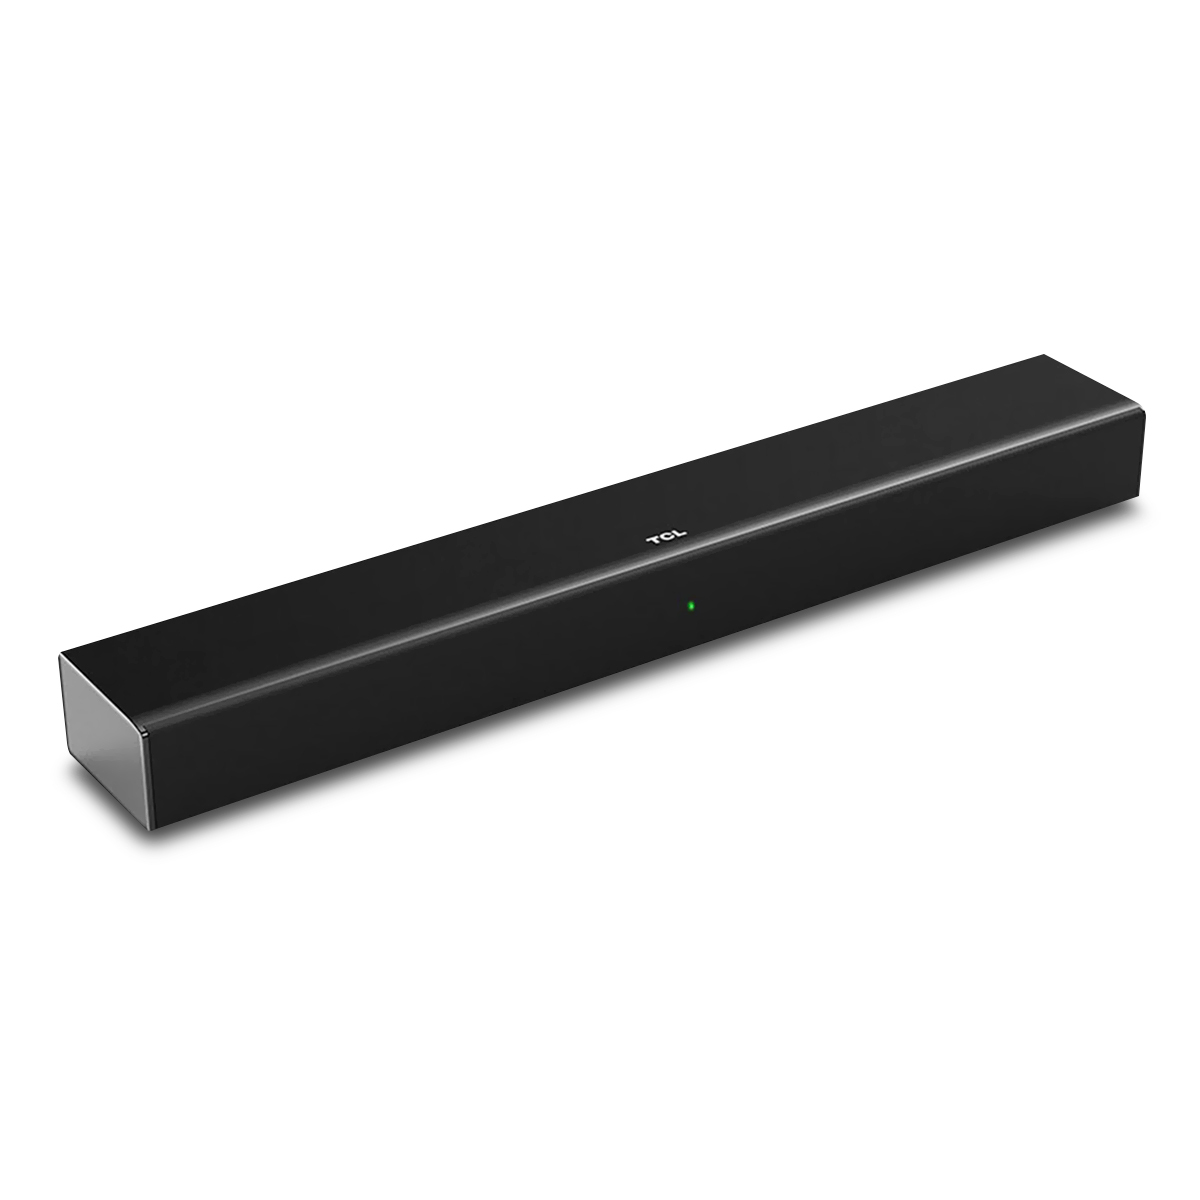 Barra de Sonido Inalámbrica TCL TS3100 / Dolby Audio / 2.0 canales / Bluetooth / USB / 3.5 mm / Negro